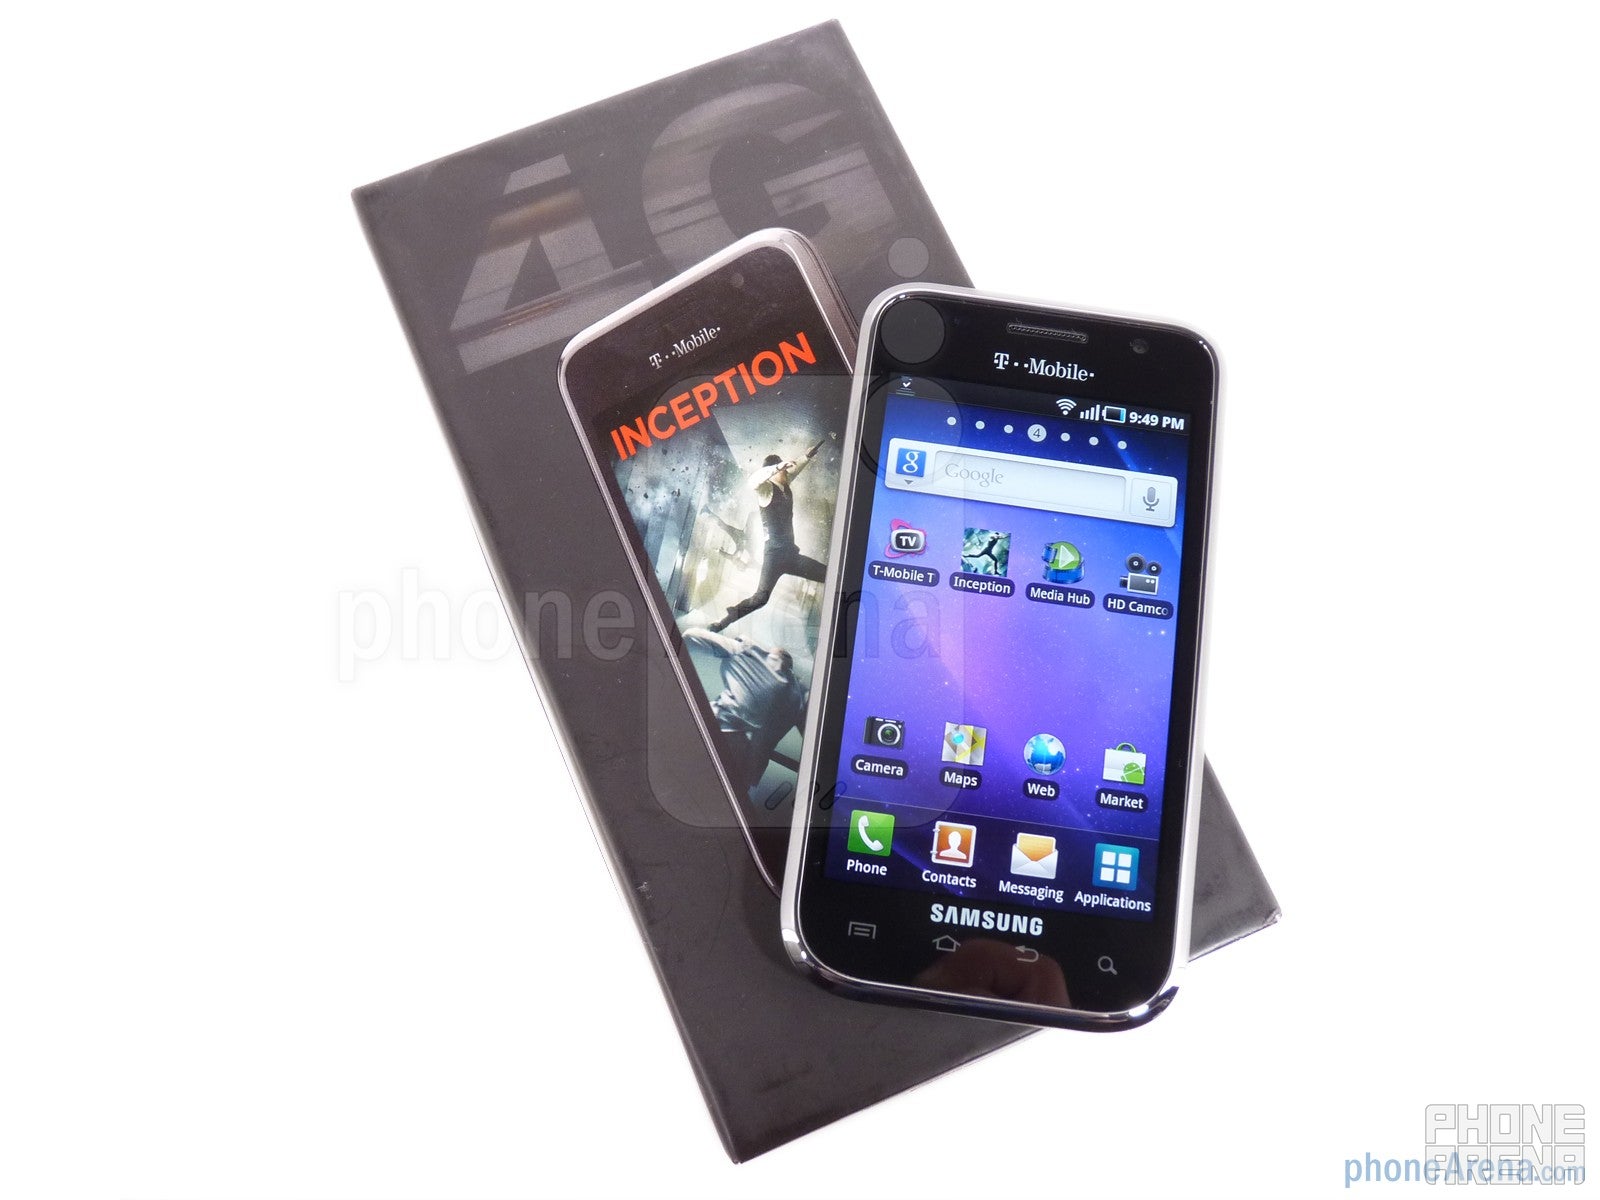 Samsung Galaxy S 4G Review